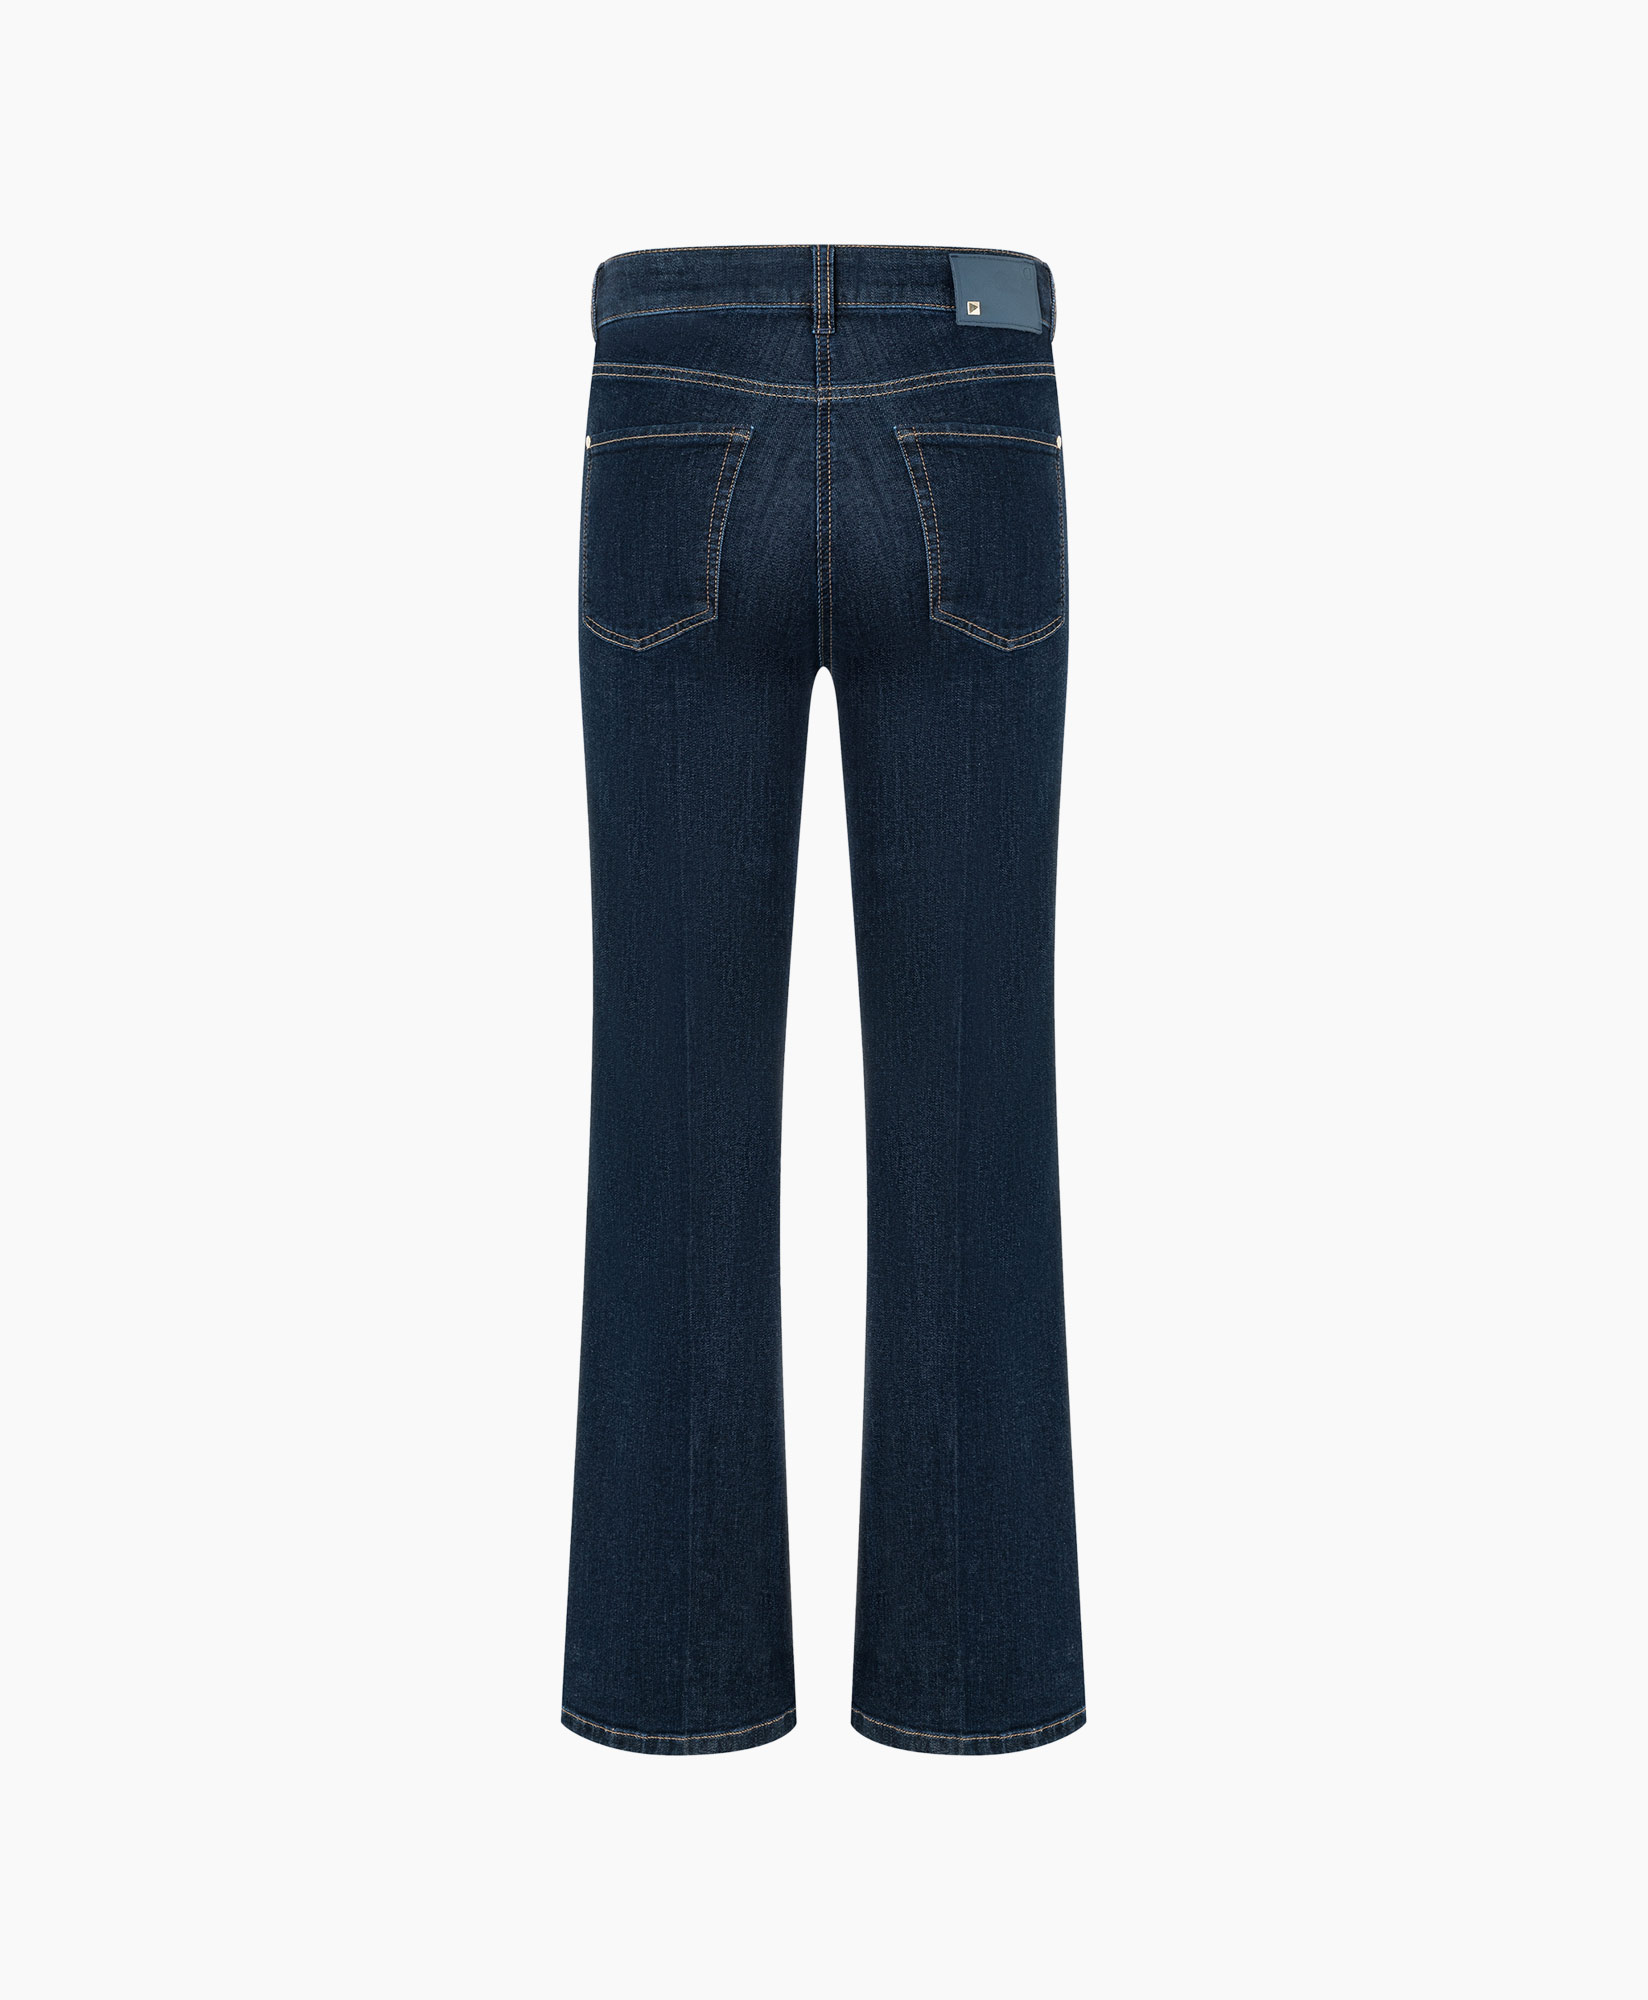 Jeans Paris Flared Highrise Stretch Donker Blauw